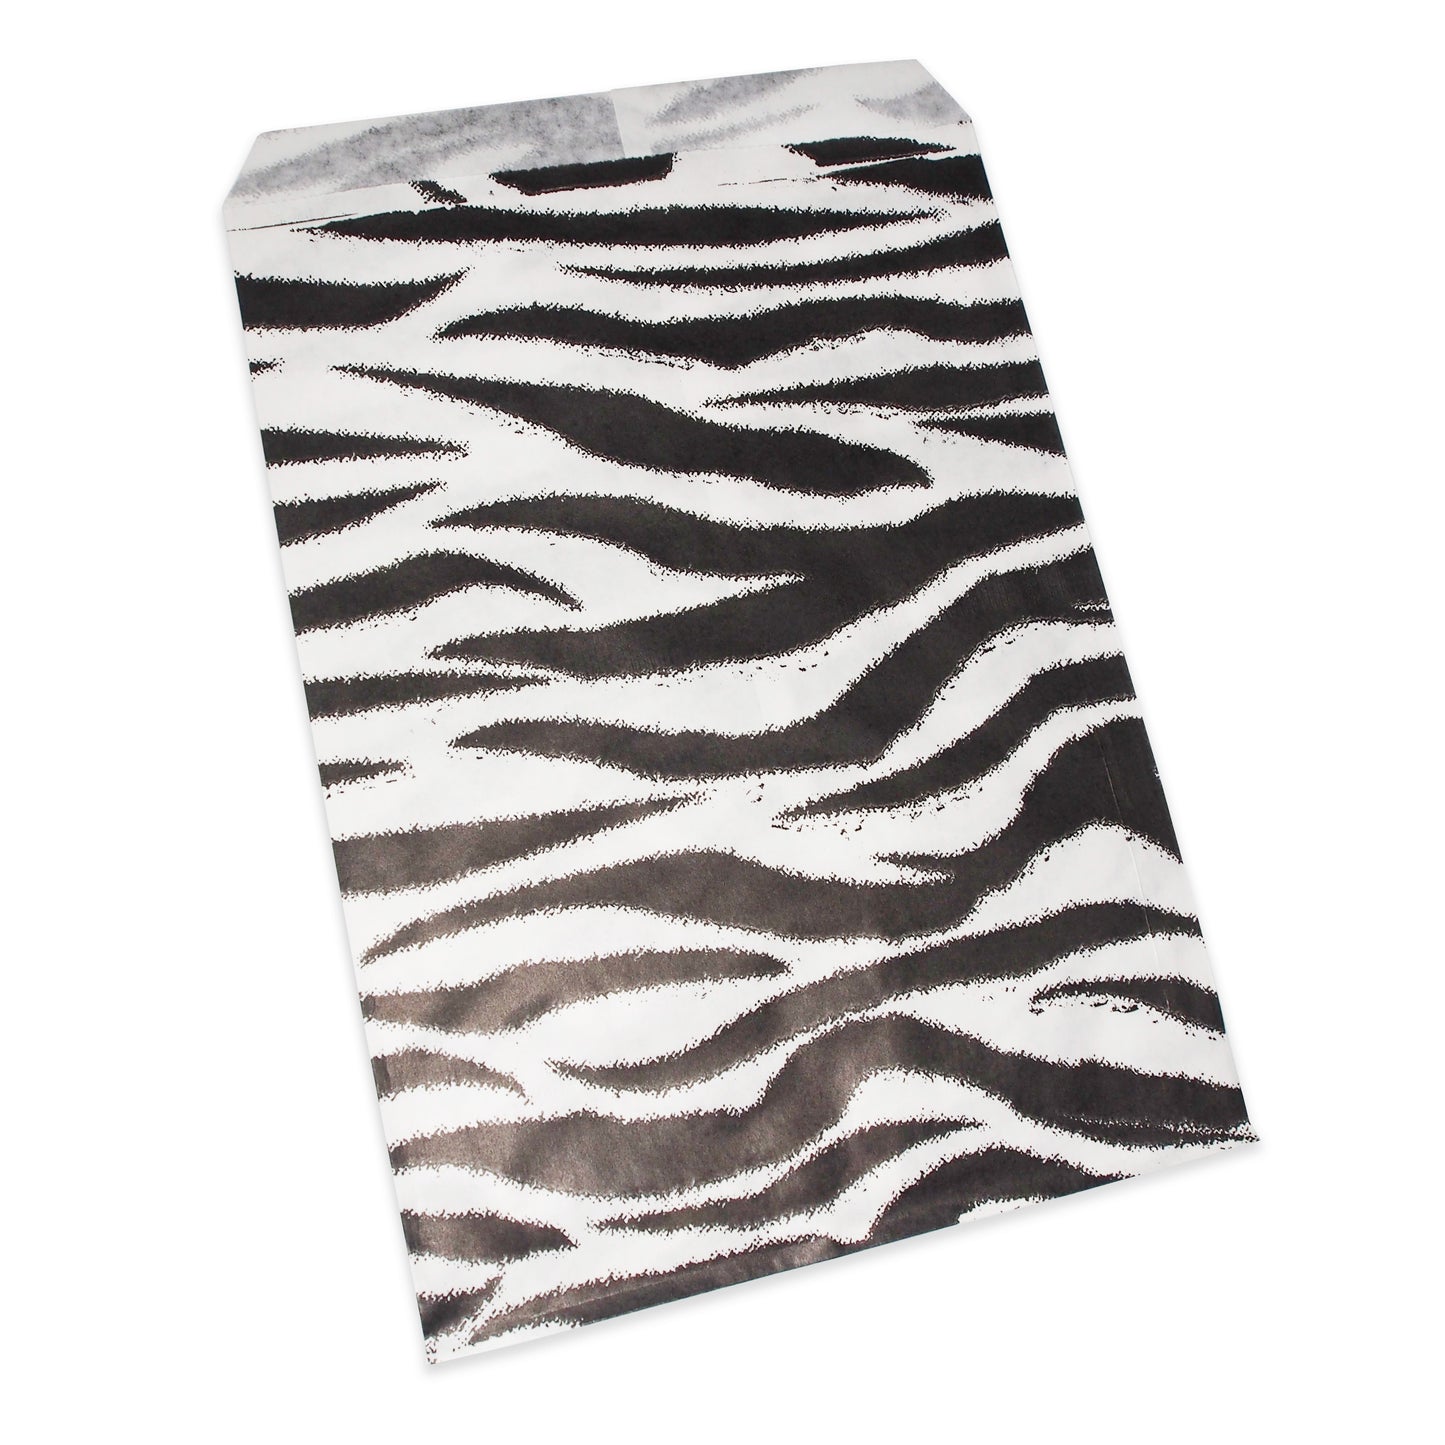 Animal Pattern Flat Paper Bags -100Bags/Pack - multiple colors & sizes available